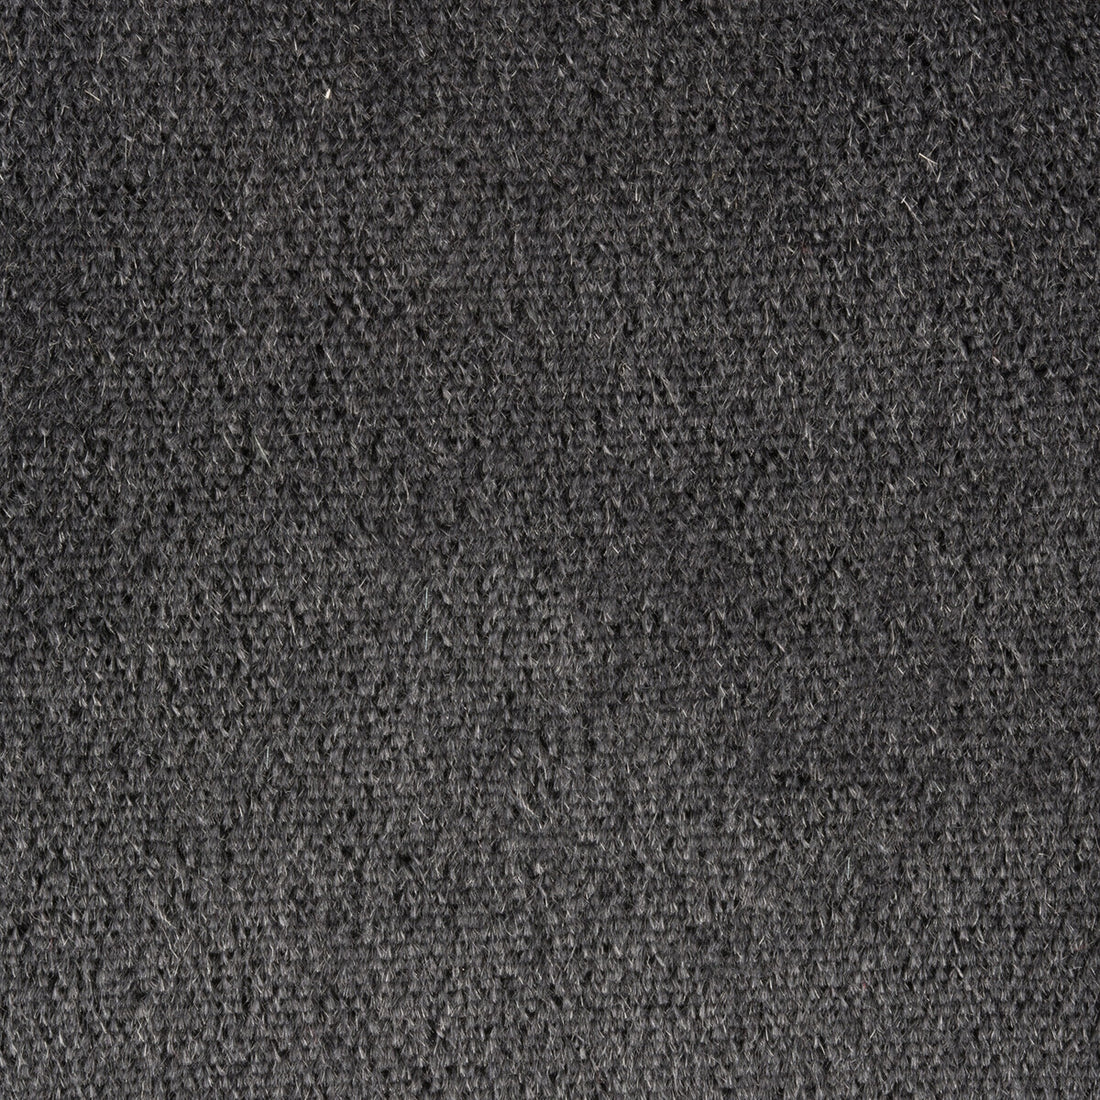 Autun Mohair Velvet fabric in coal color - pattern BR-89778.966.0 - by Brunschwig &amp; Fils